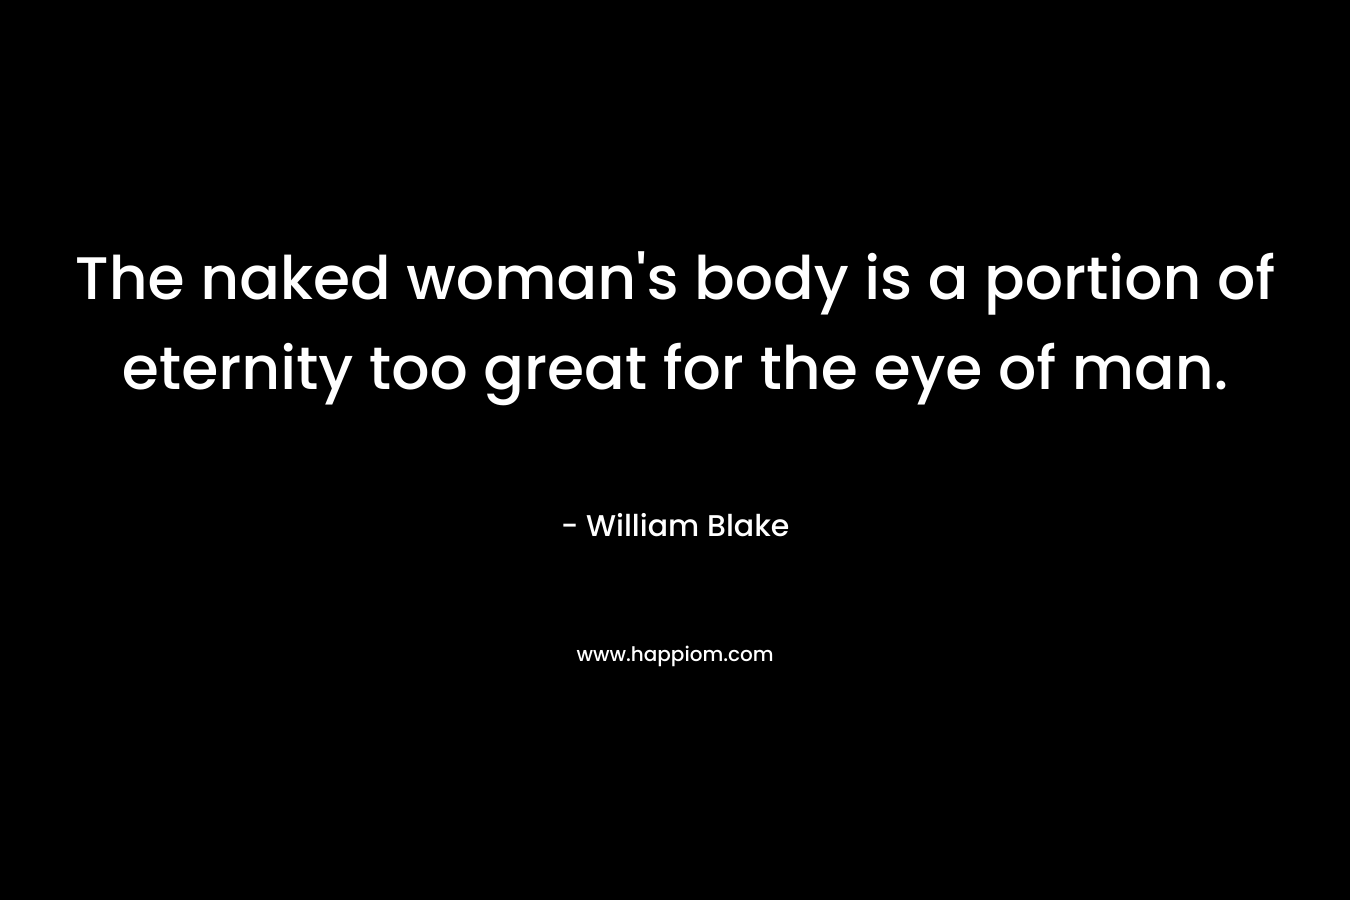 The naked woman's body is a portion of eternity too great for the eye of man.